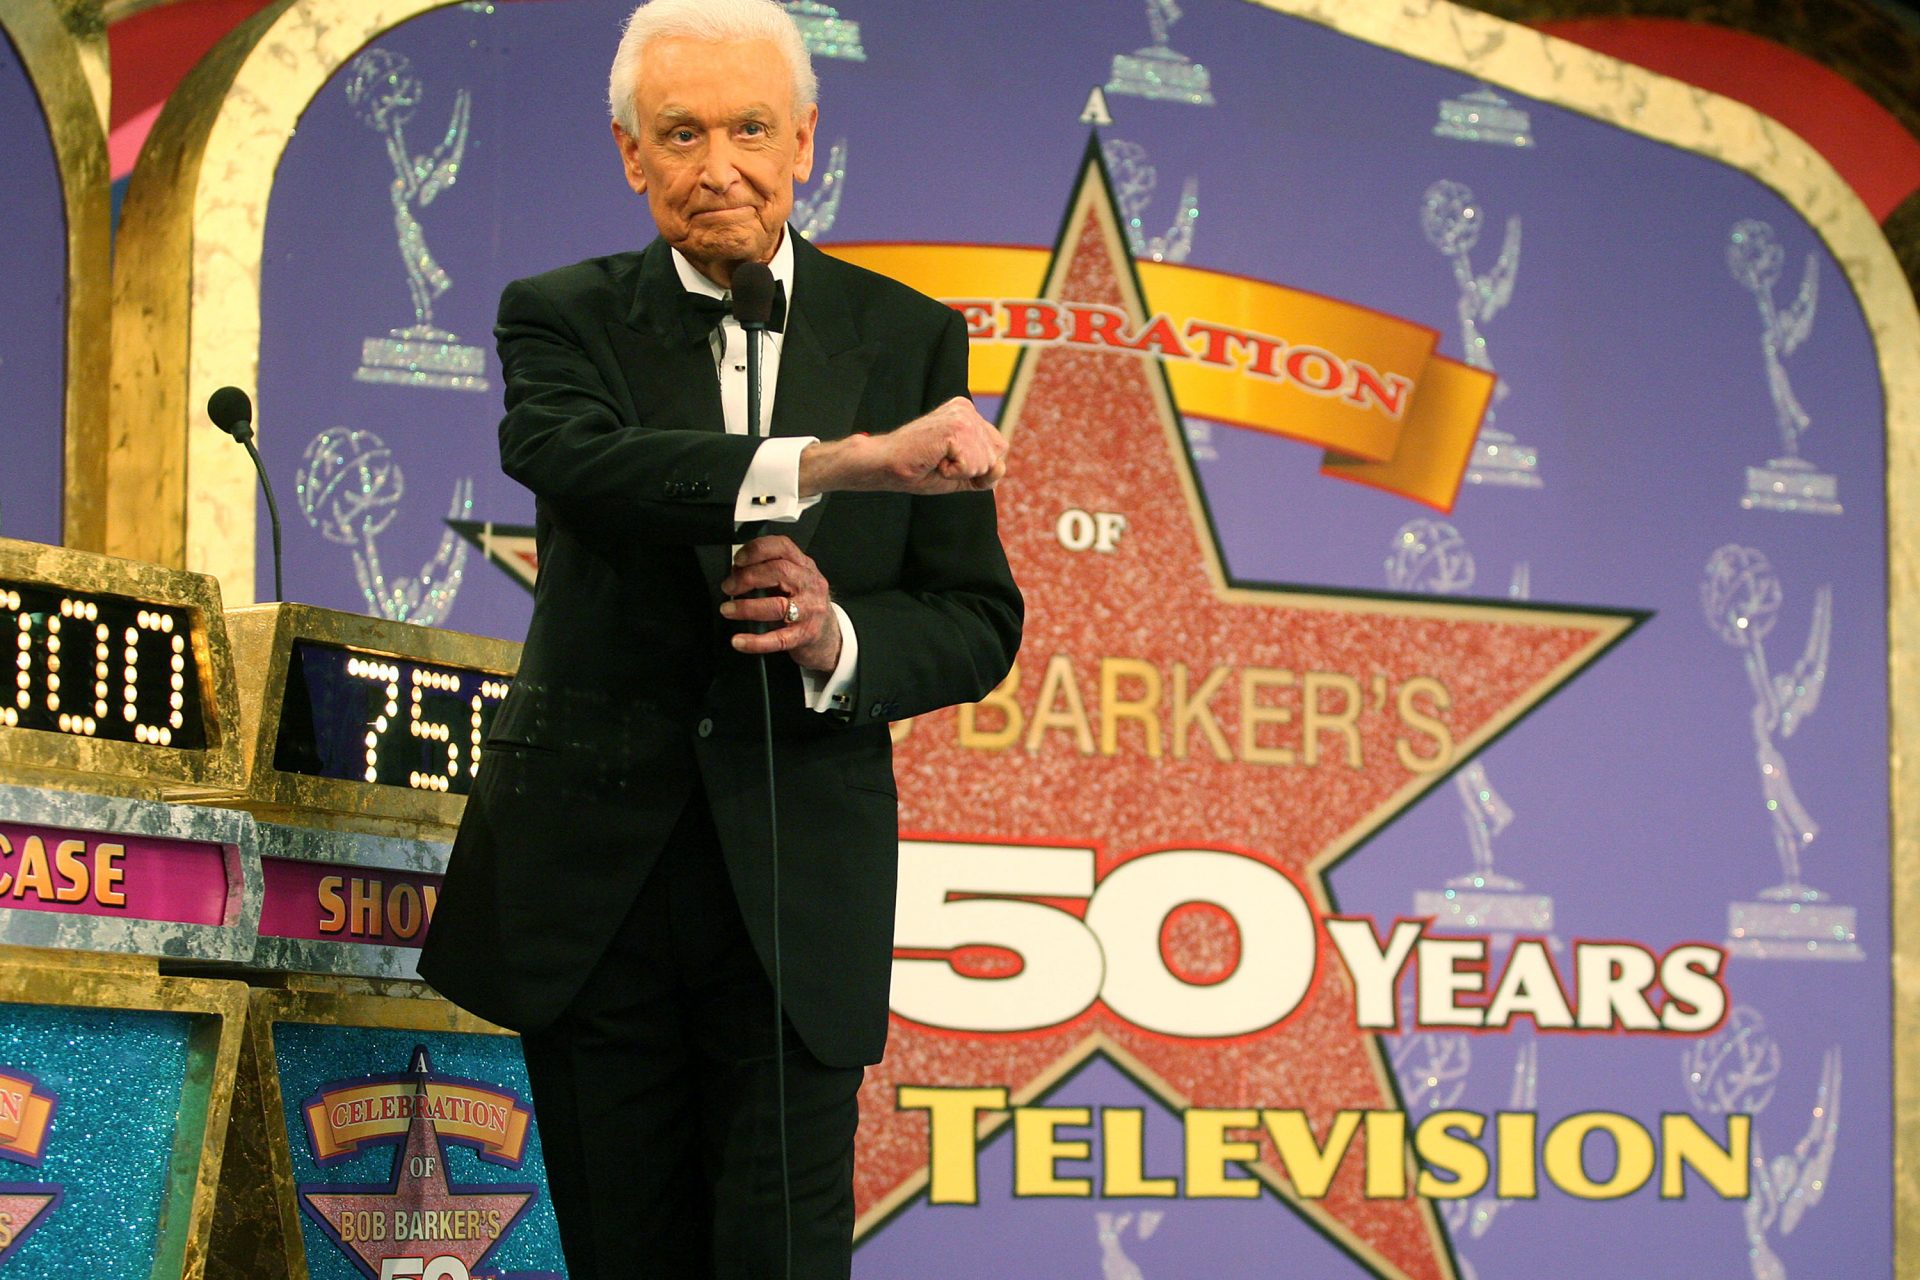 Photos: The life and death of Bob Barker, legendary host of 'The Price is Right'